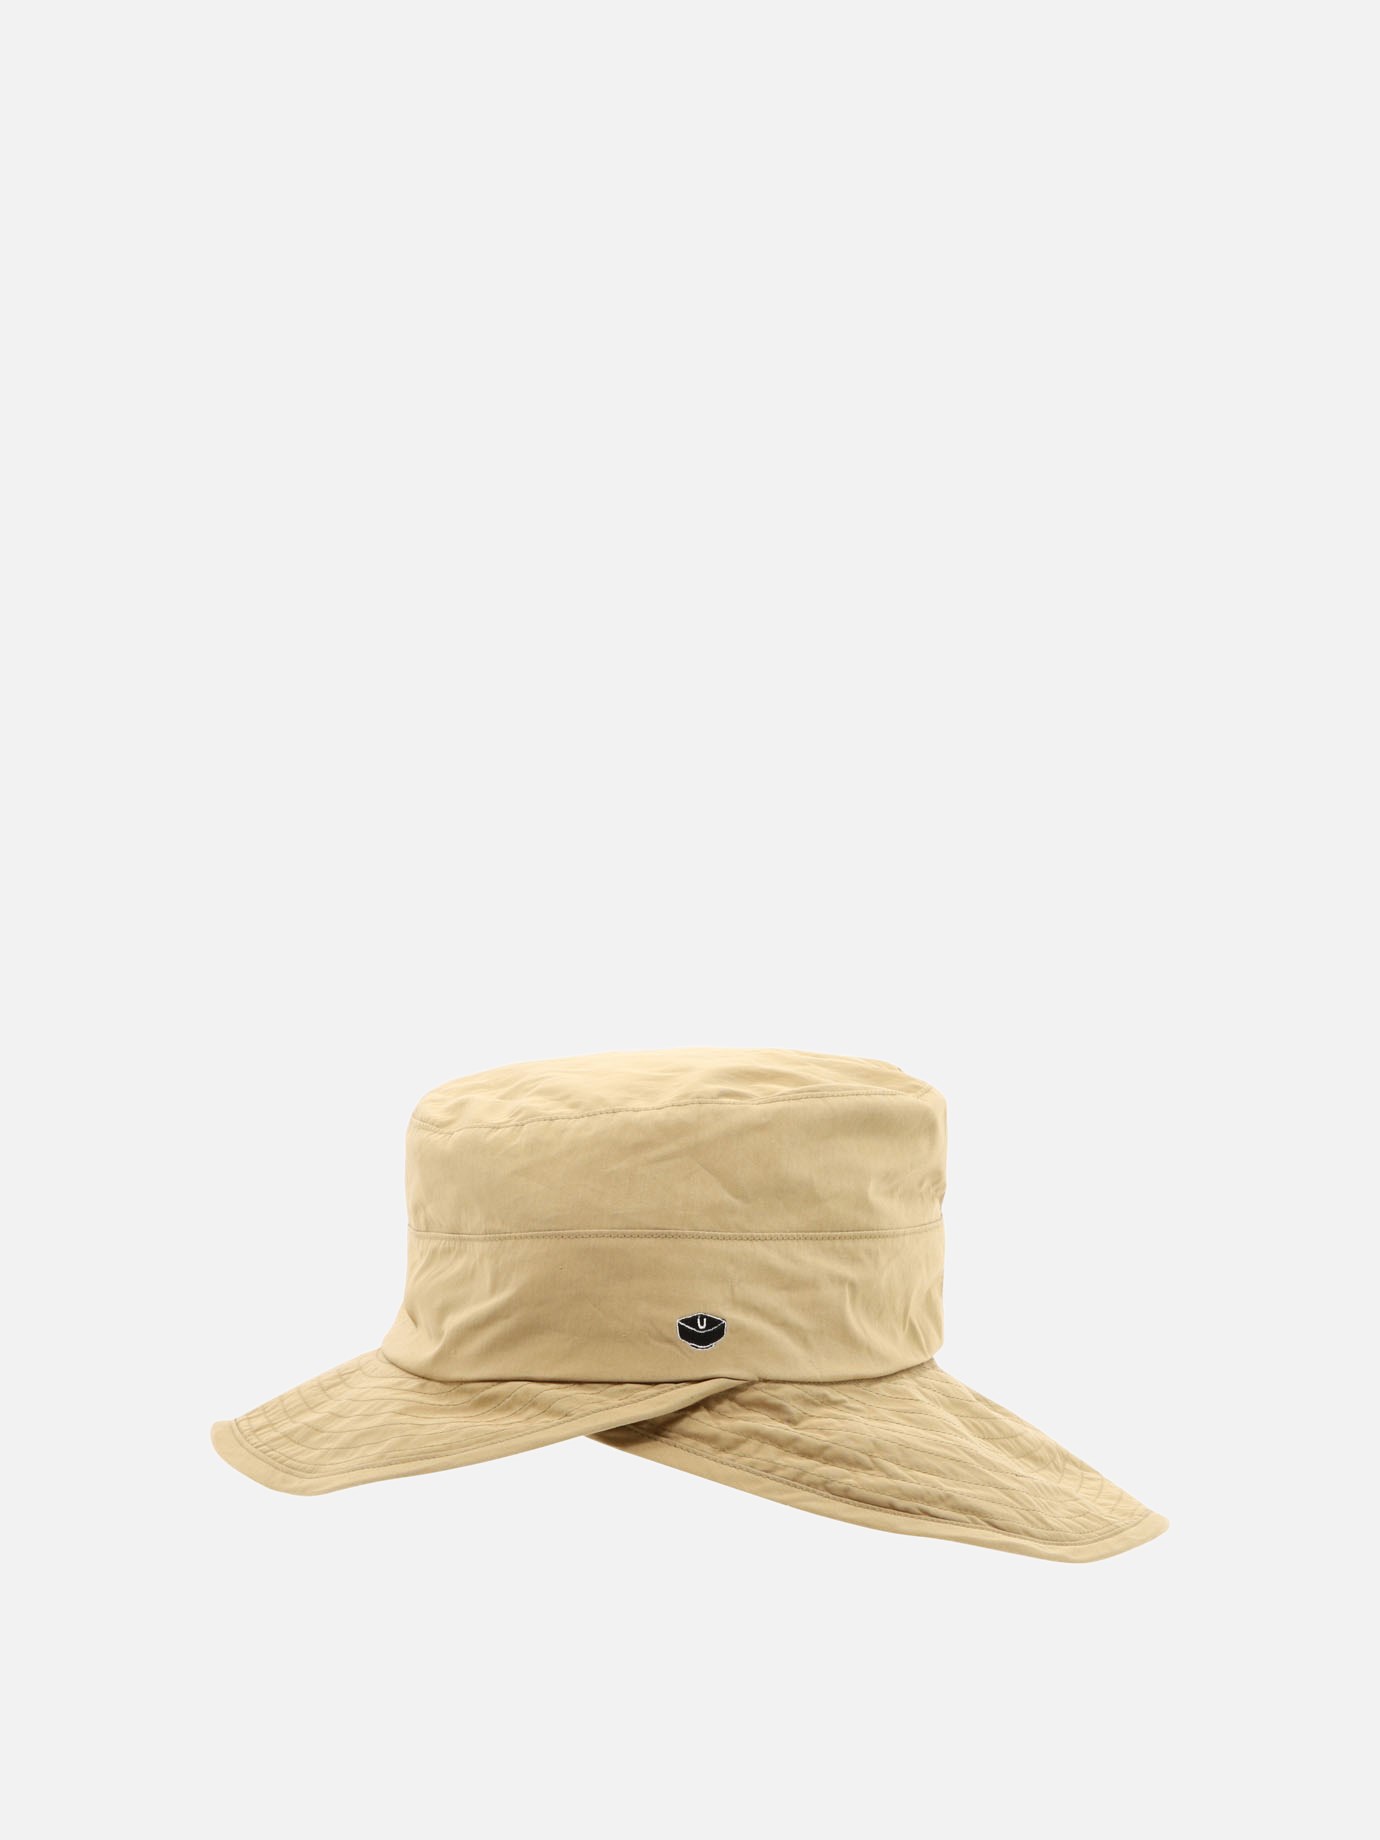 Cotton bucket hatby Undercover - 2